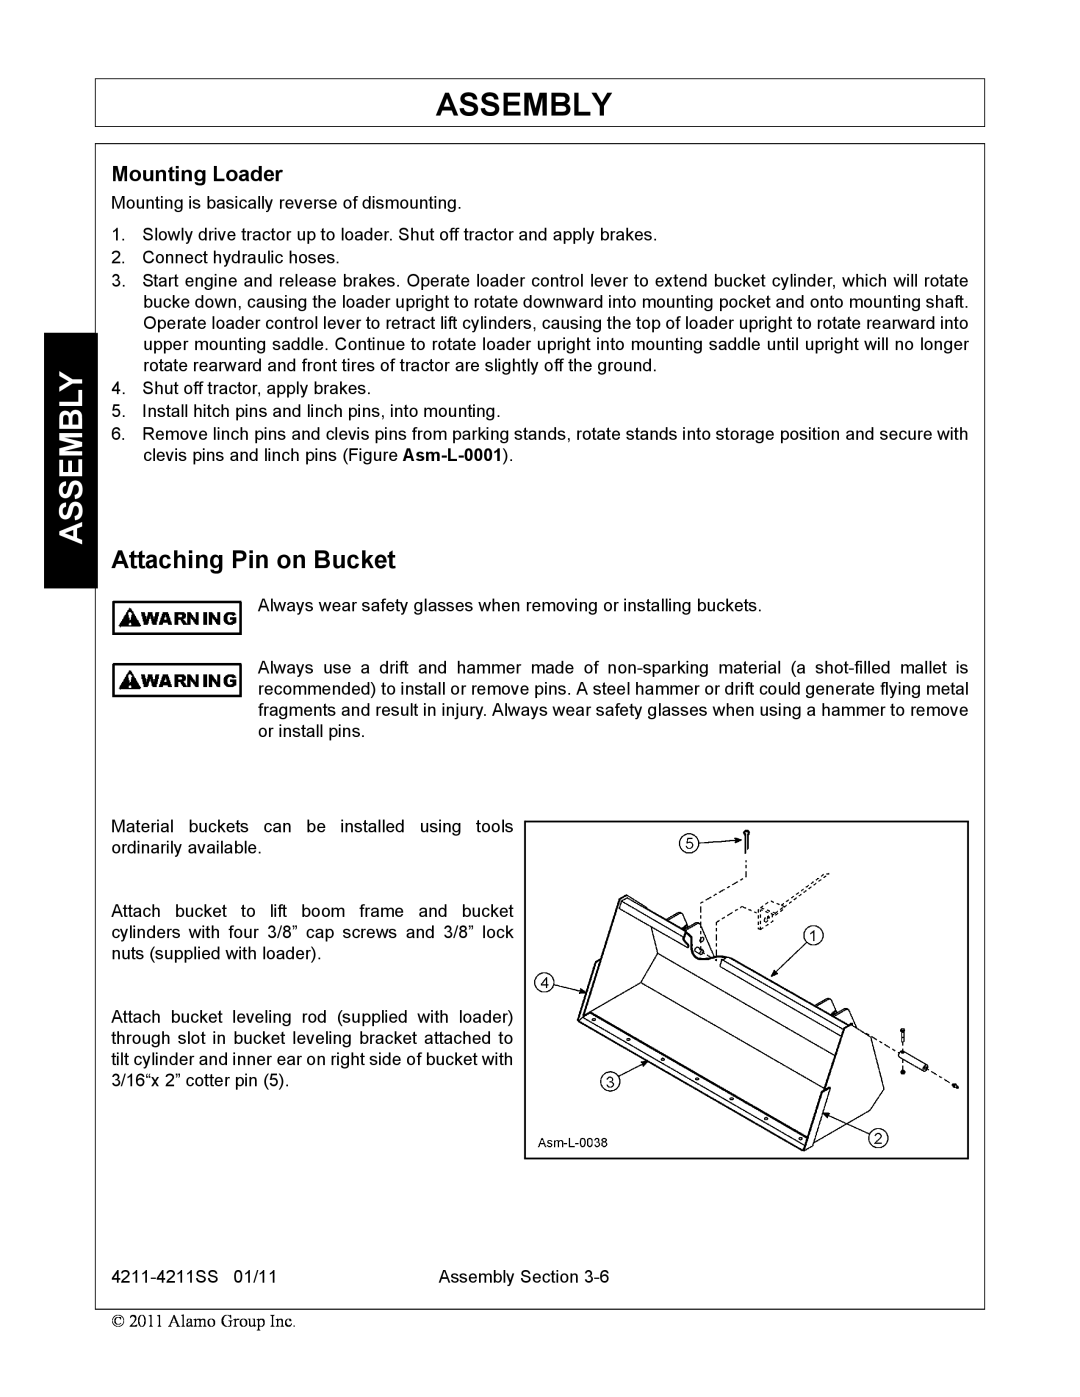 Servis-Rhino 4211SS manual Assembly, Attaching Pin on Bucket, Mounting Loader 